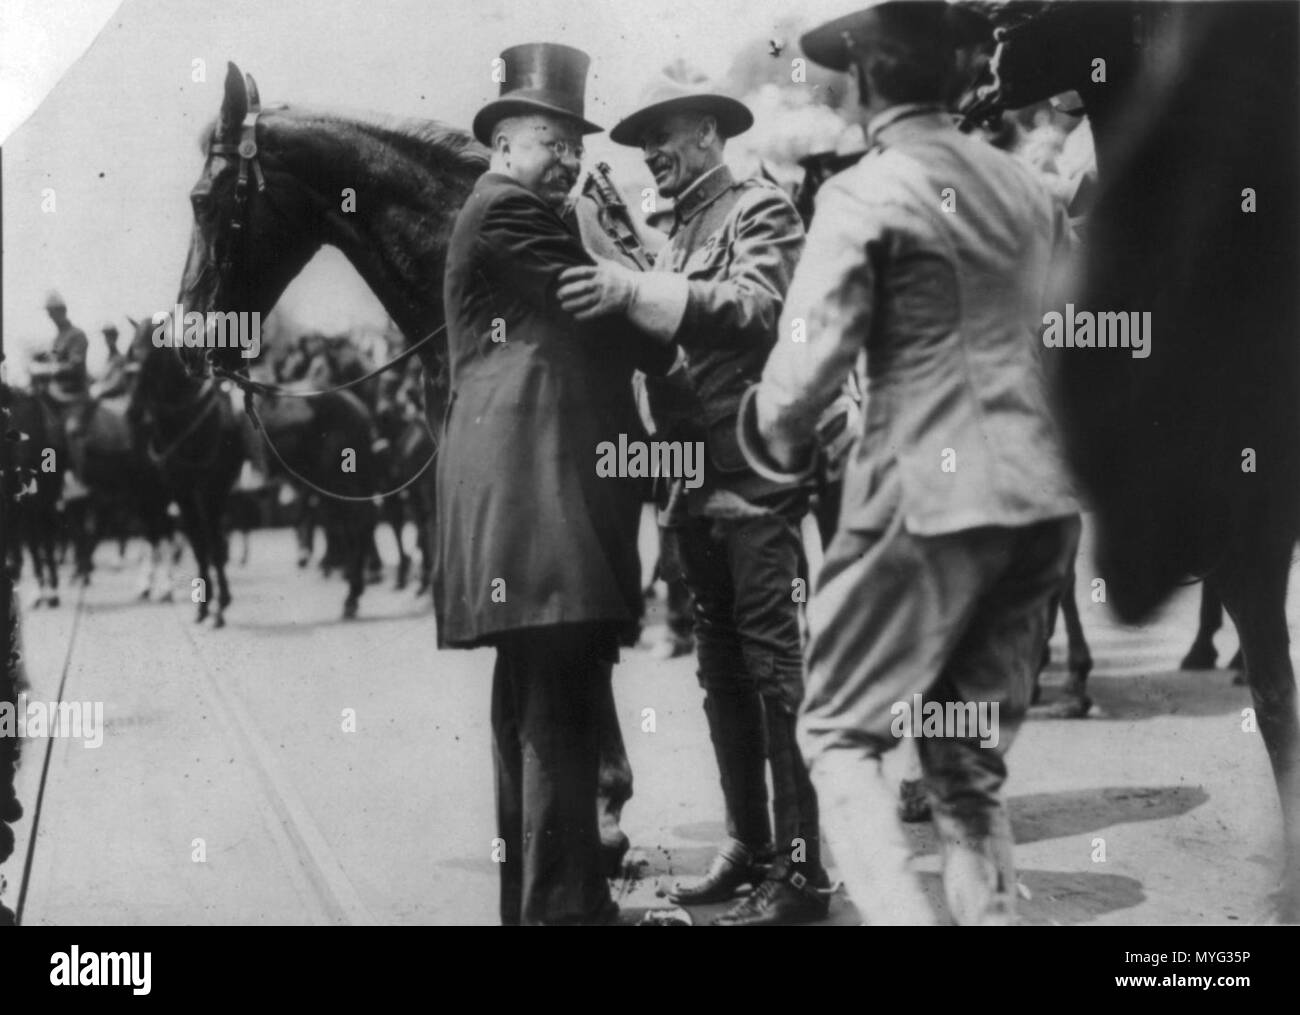 . English: Photograph showing Theodore Roosevelt and Col. Alexander O. Brodie, in uniform, greeting each other, surrounded by horses. circa 1910 June 23. Paul Thompson (photographer) 219 Greeting Col. Brodie of Rough Riders Stock Photo